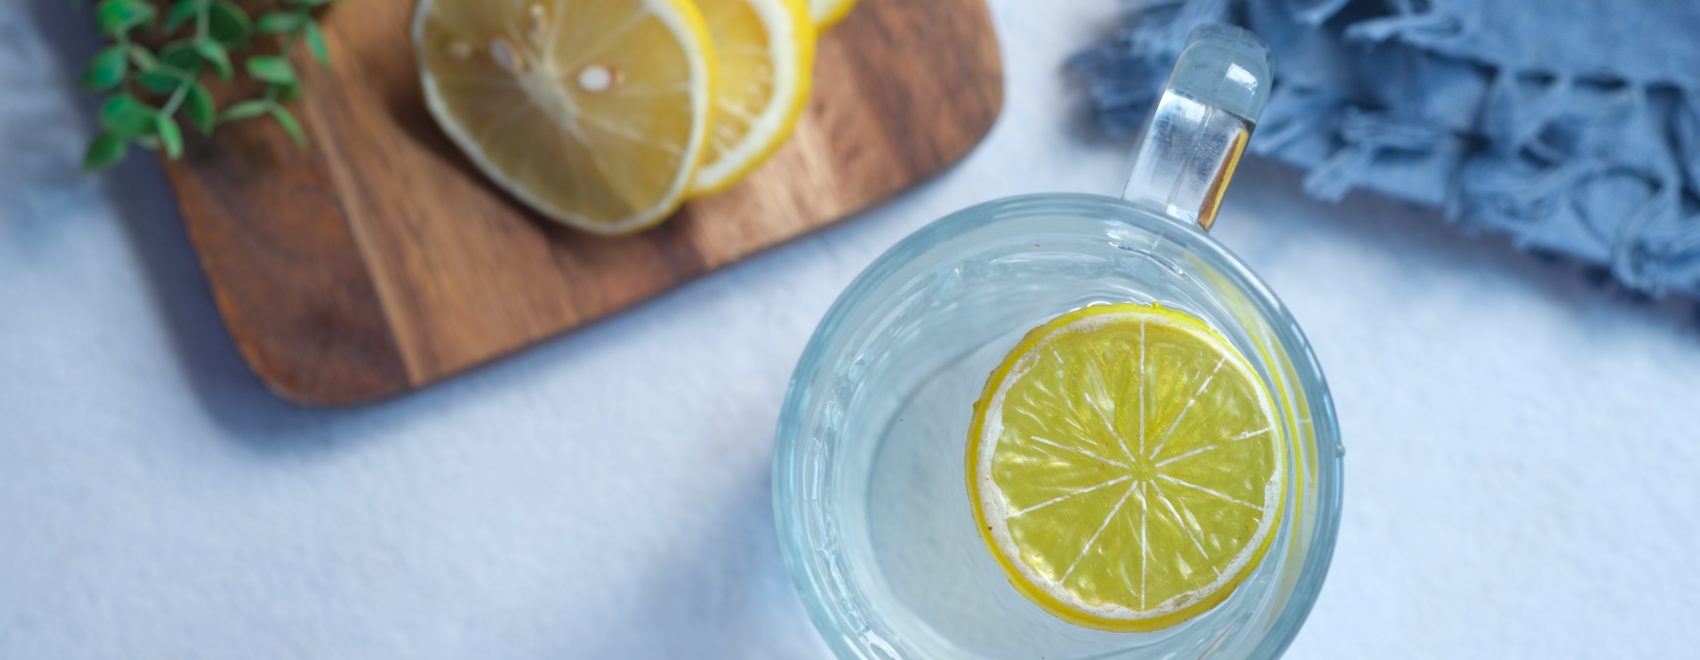 Image of a lemon in a glass of water. Now is the time to give yourself an immune system boost. A holistic doctor in Orland Park, IL can help you get started in SHAPE ReClaimed. That and functional medicine can help you support your immune system. Call today!